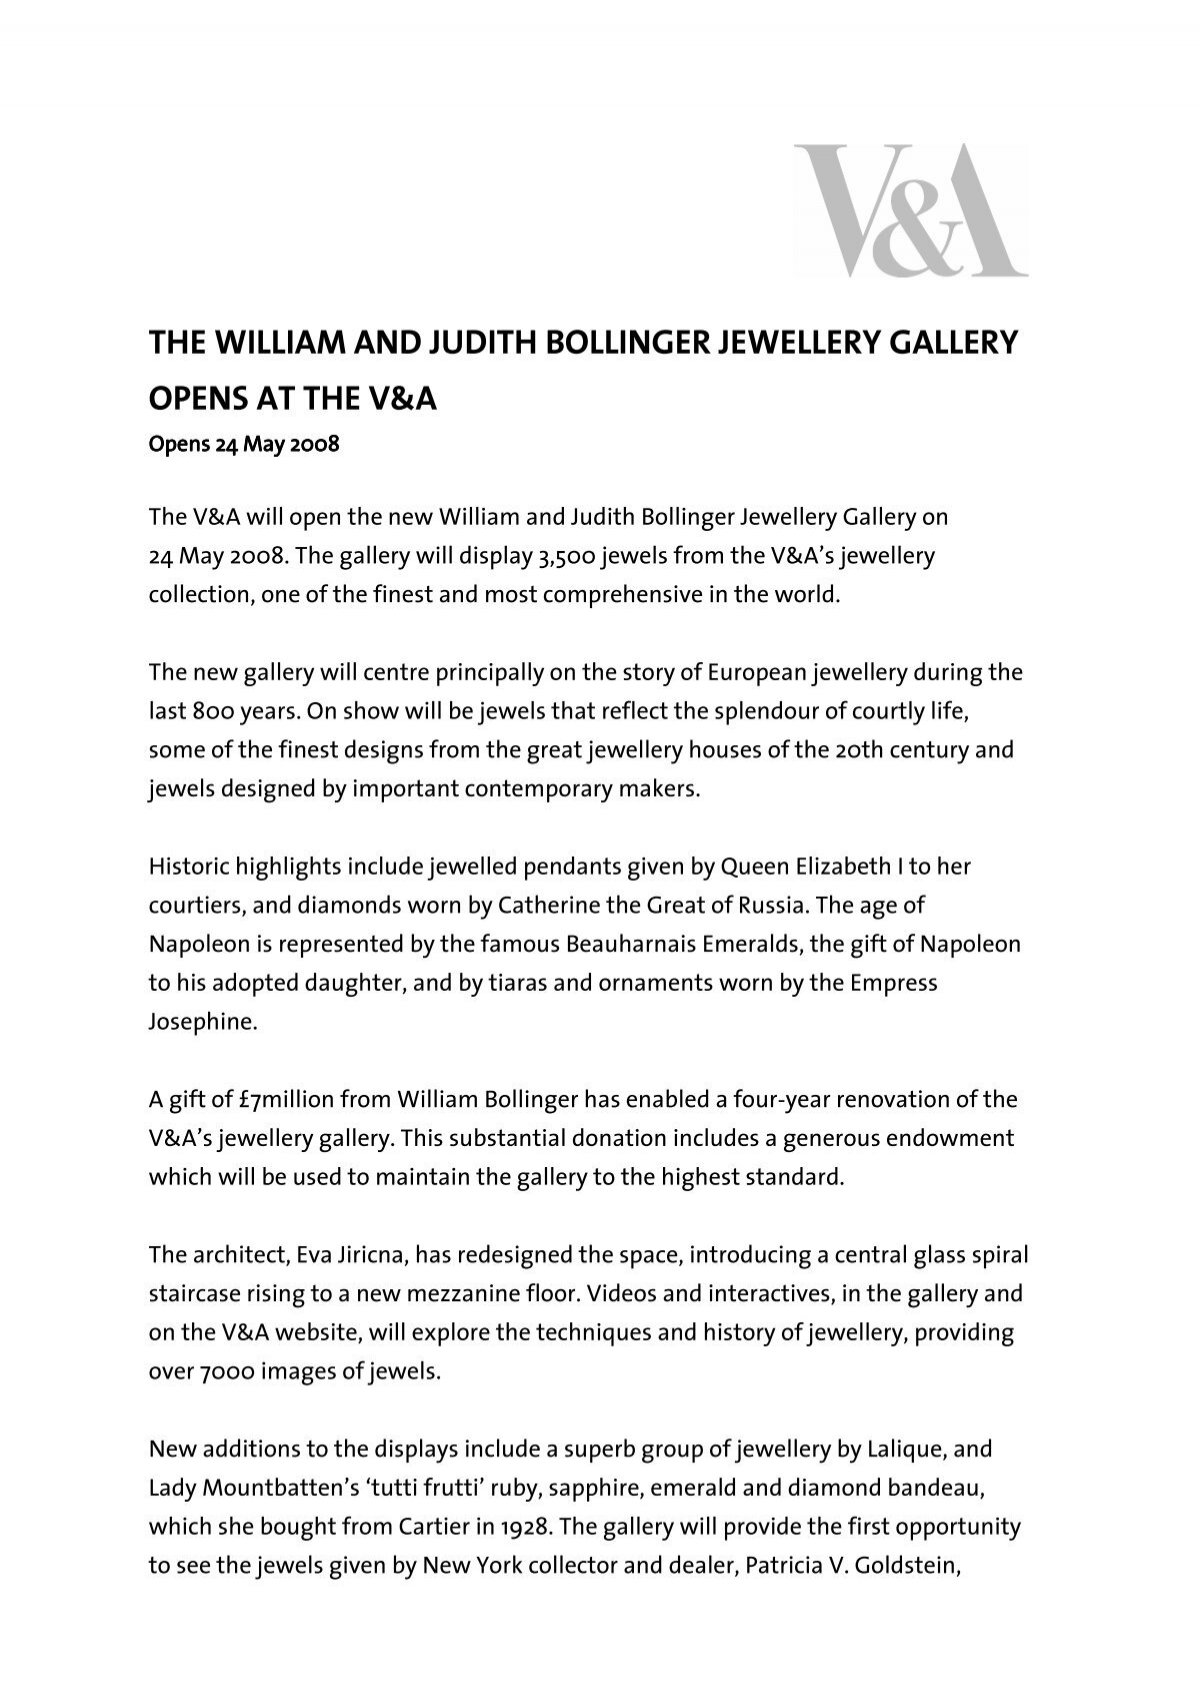 The William and Judith Bollinger Gallery, Victoria and Albert